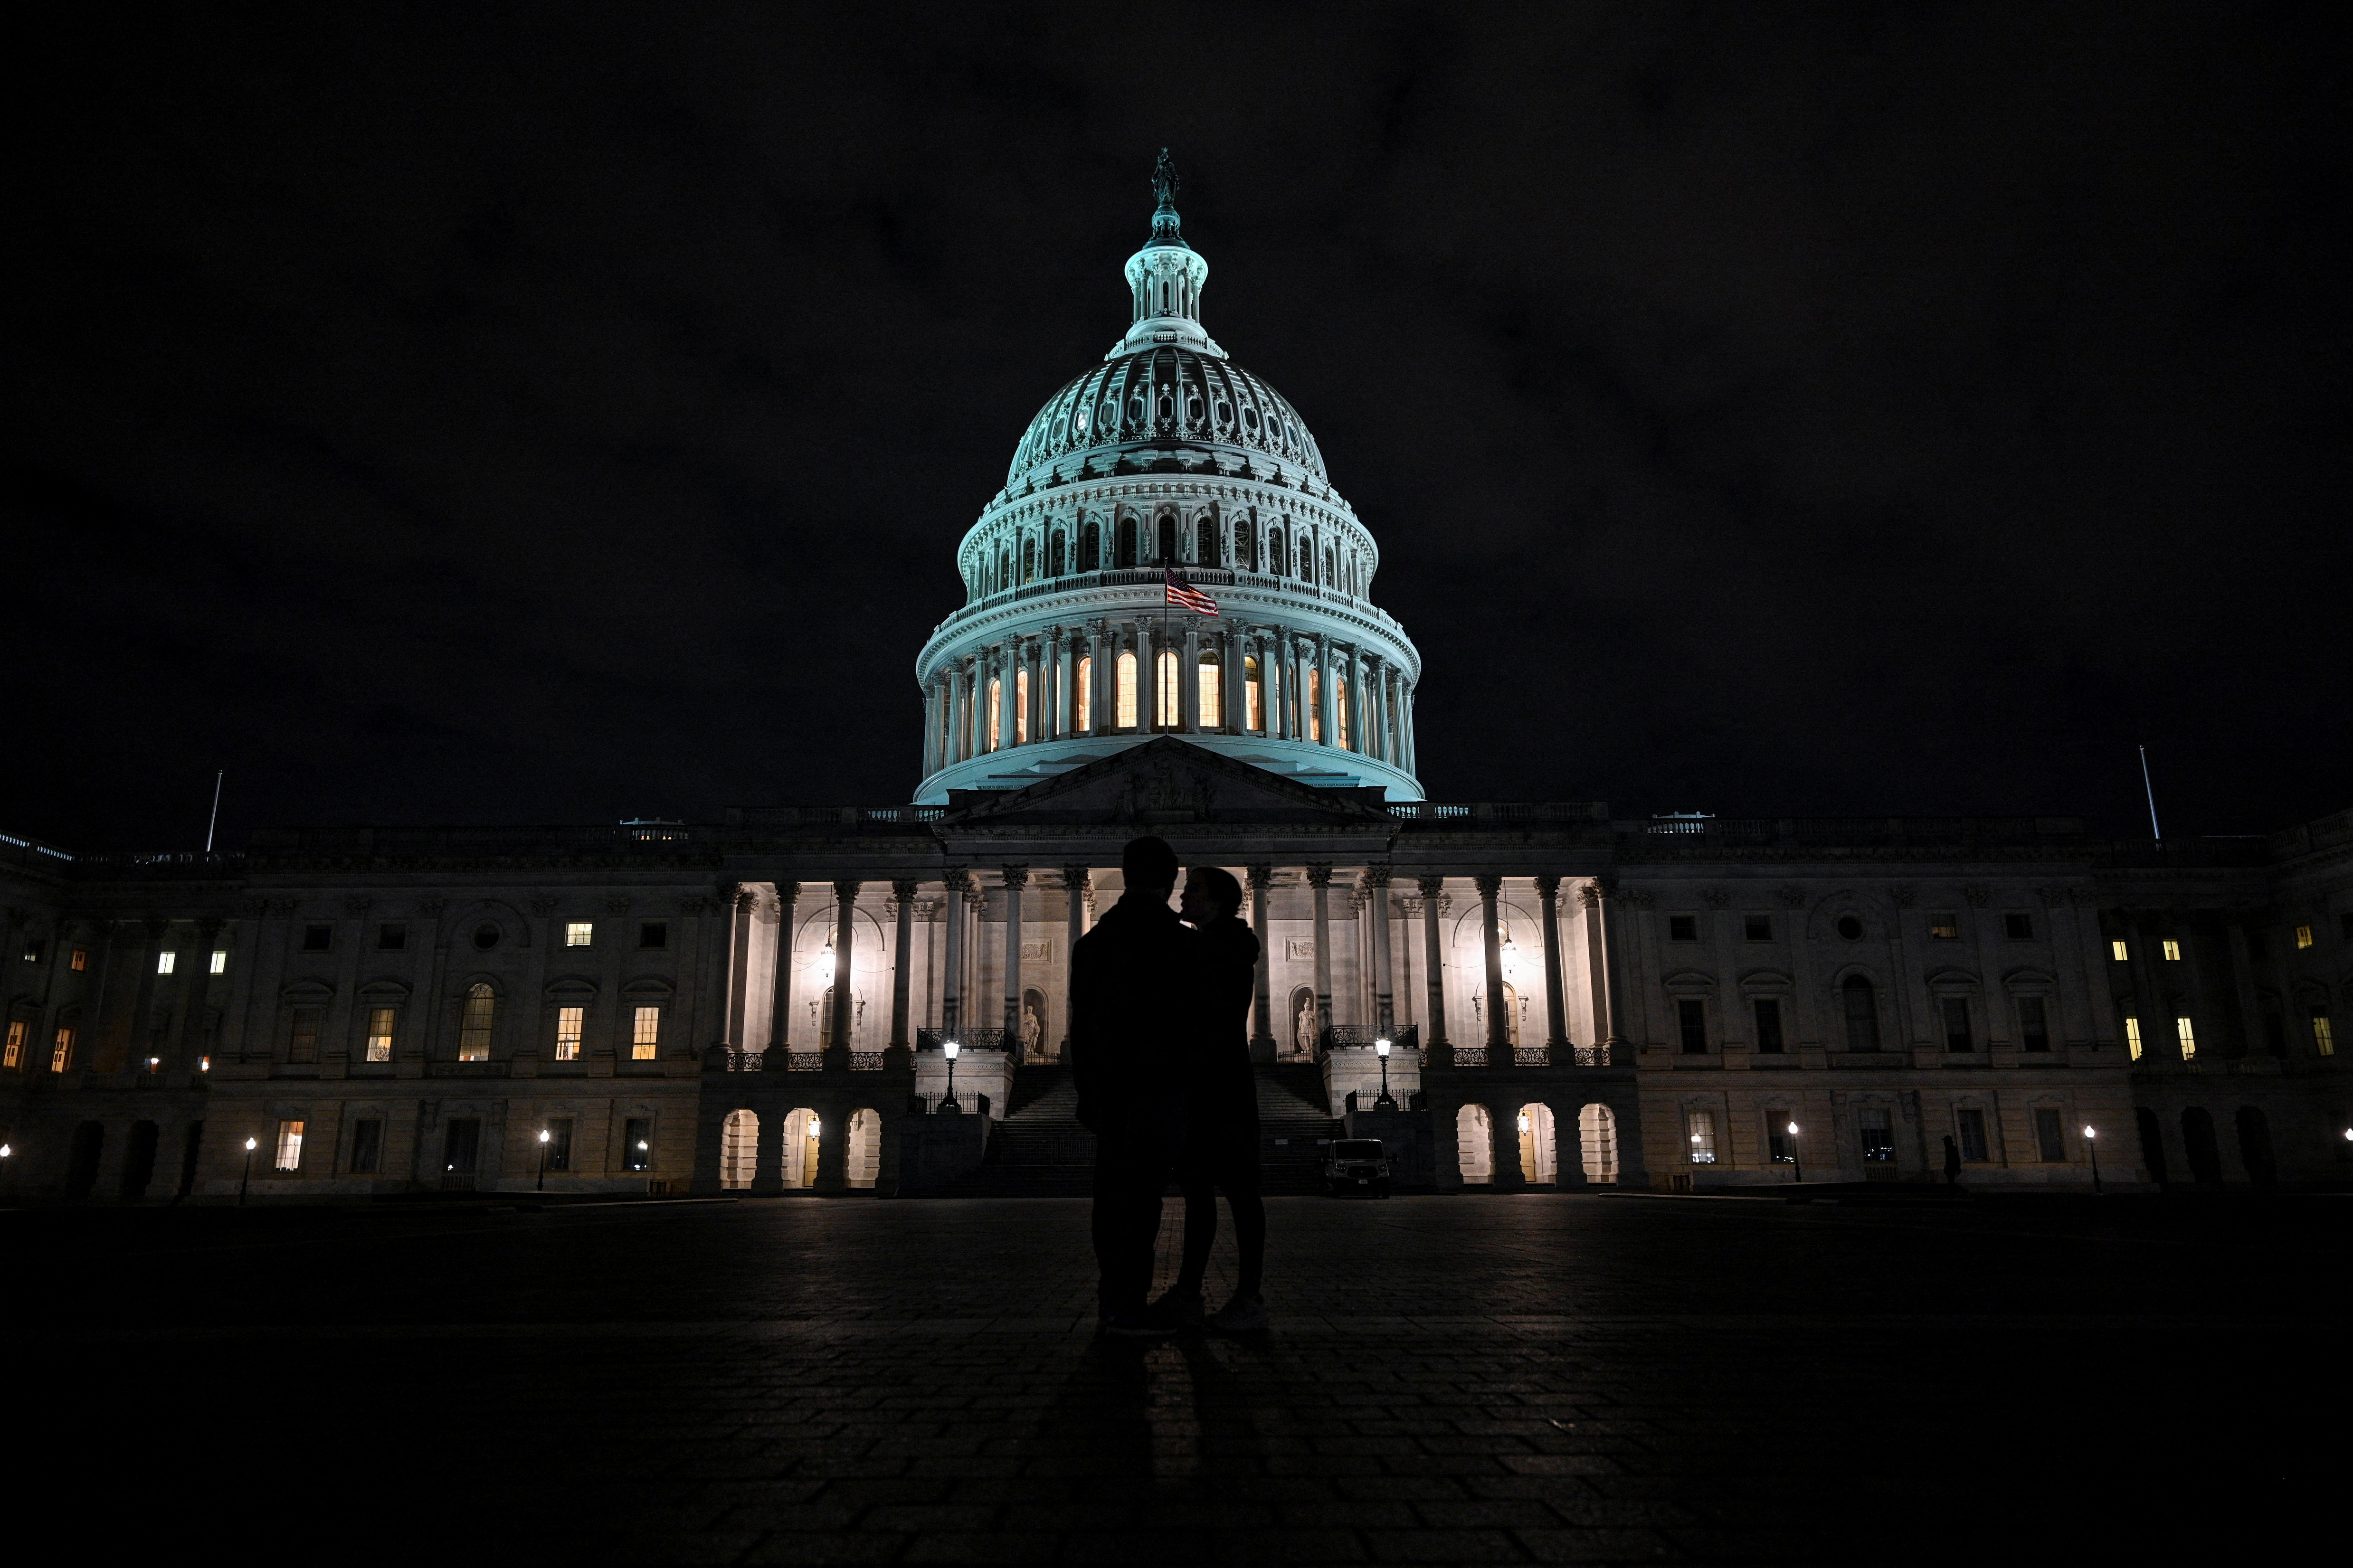 The moon is seen behind the dome of the U.S. Capitol building at night in Washington